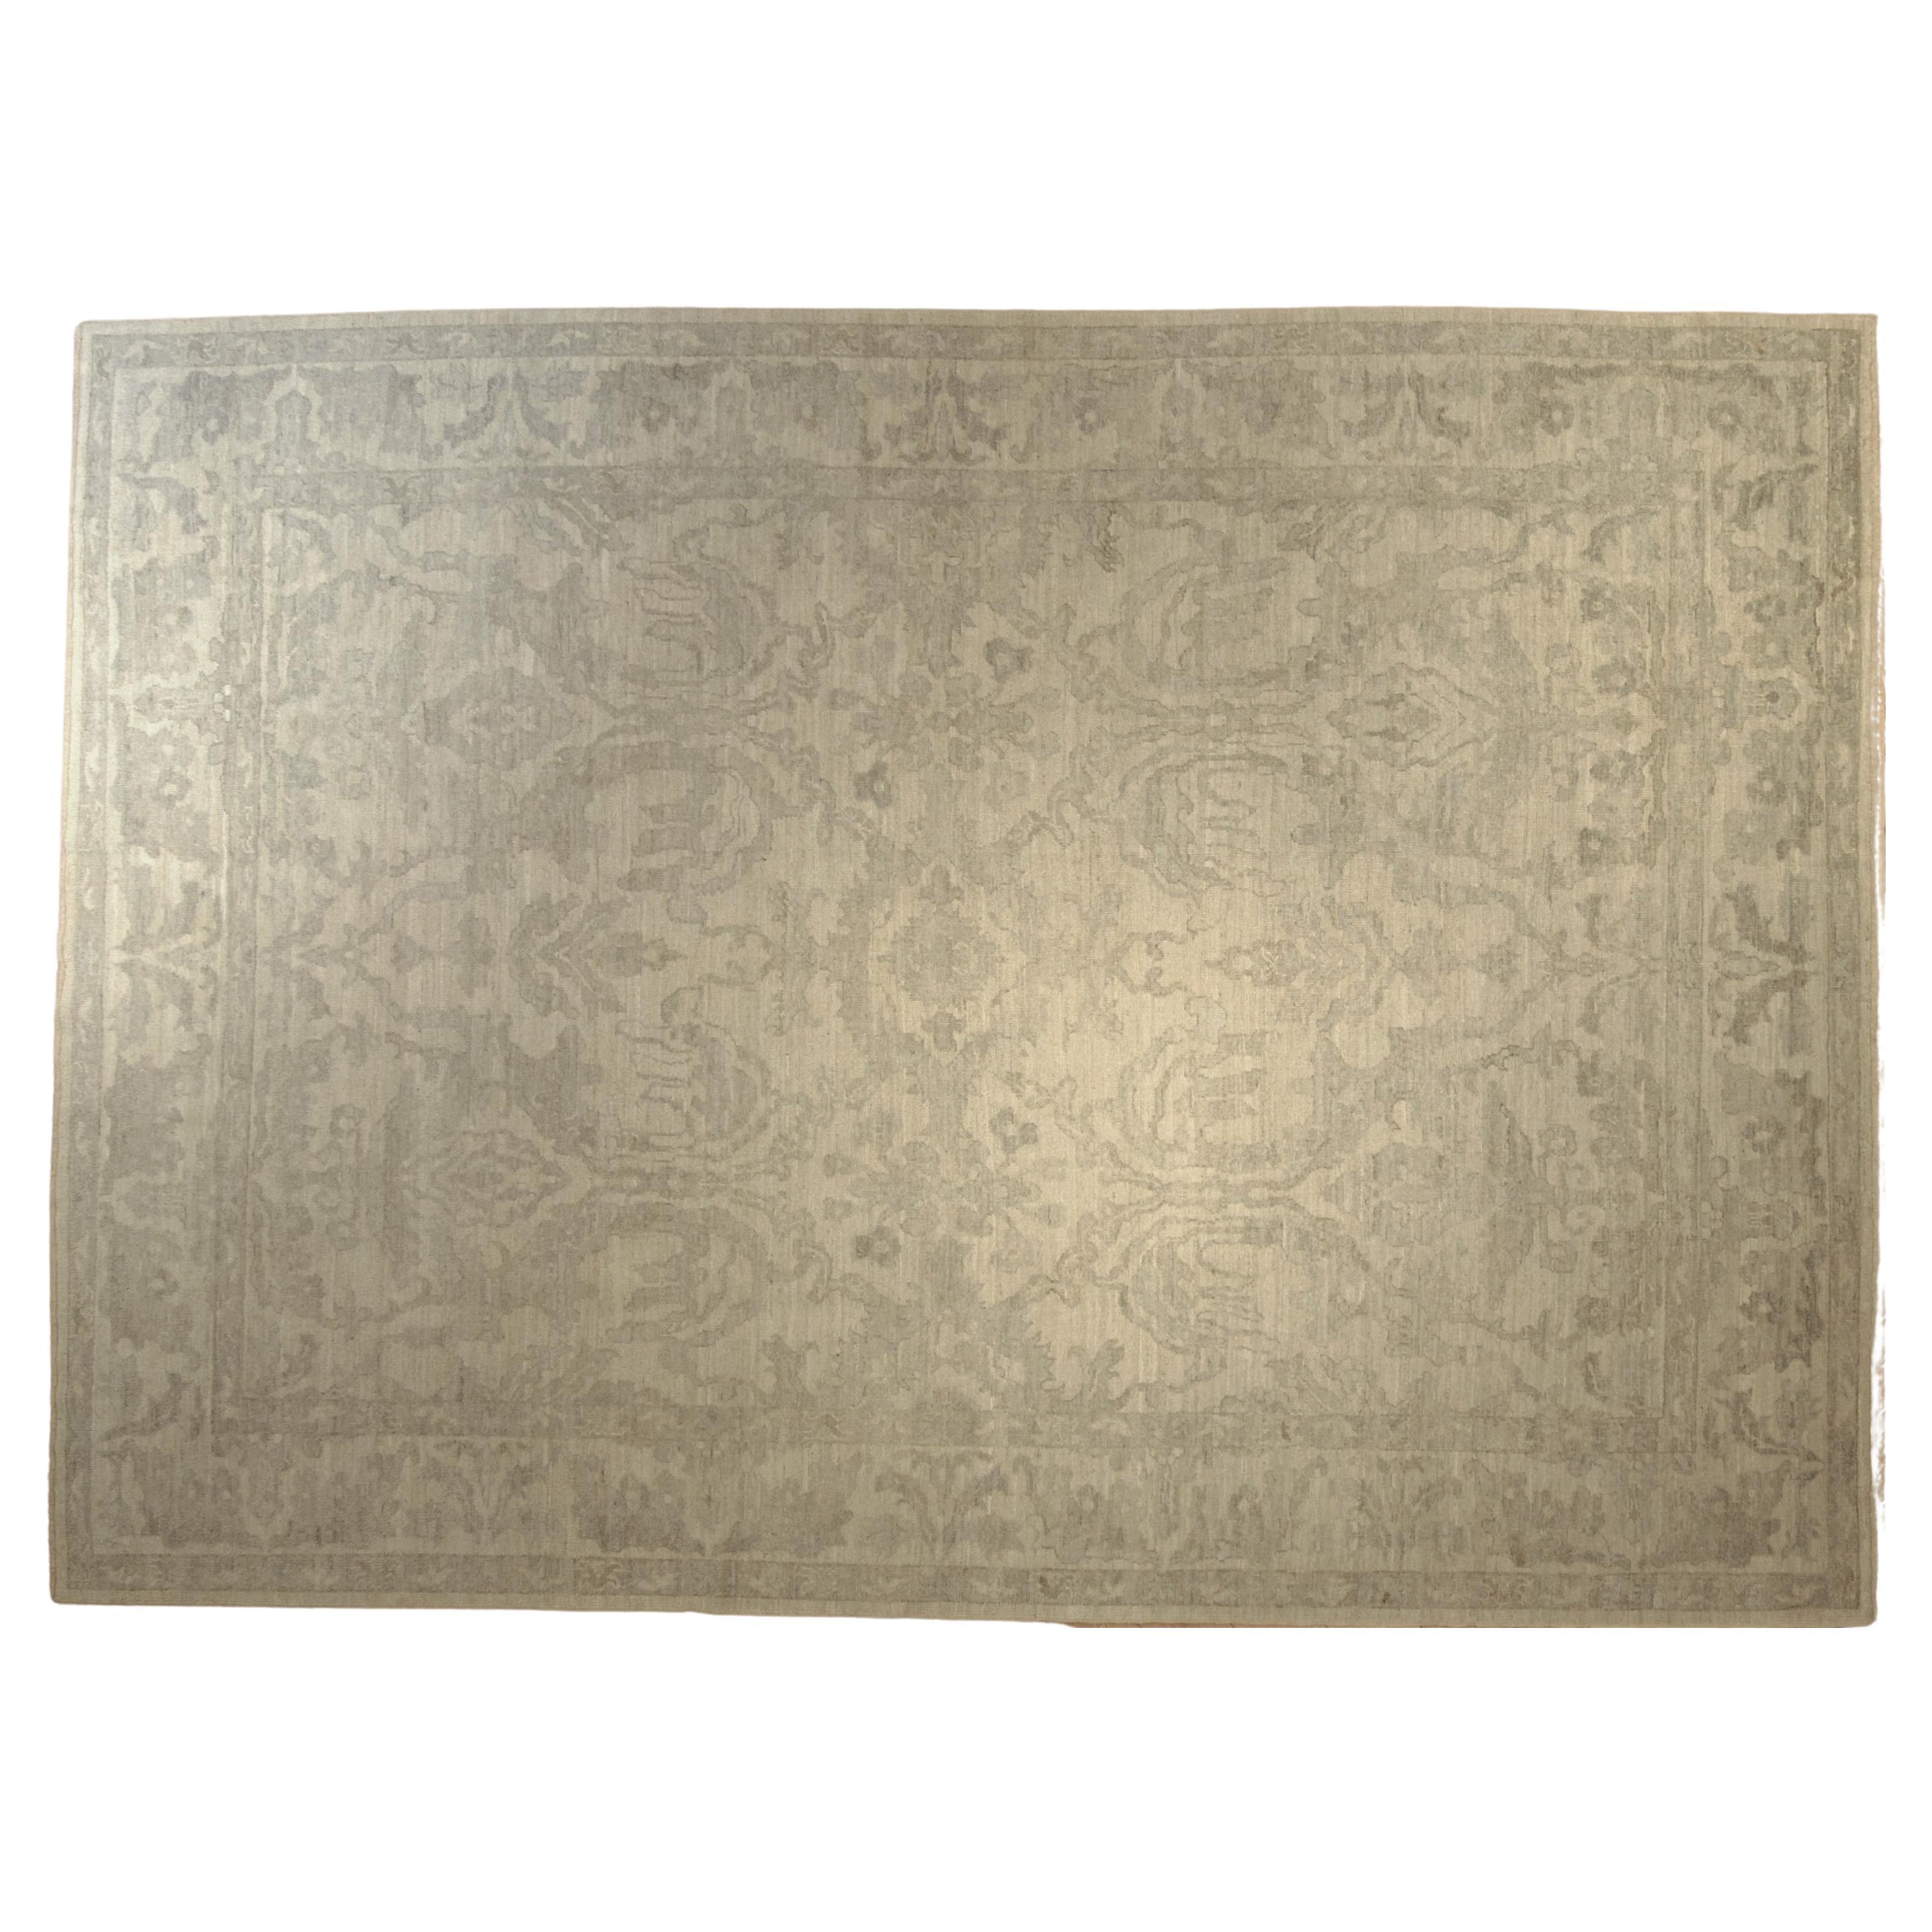 Large Oushak Carpet Silver Colored Wool